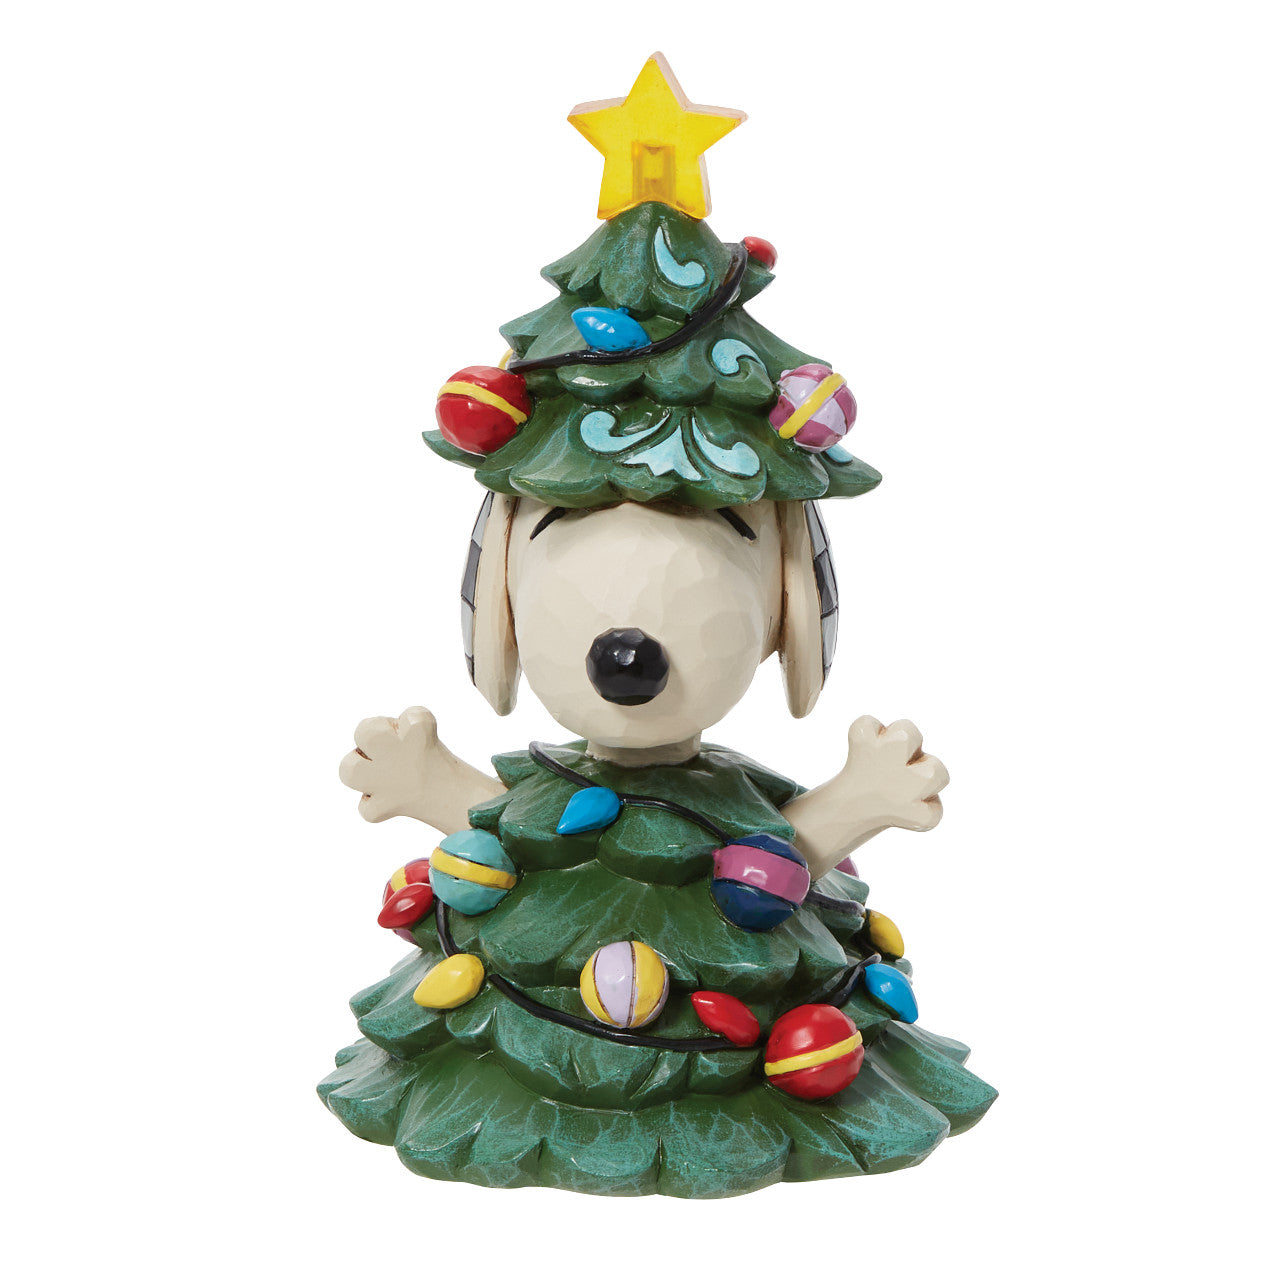 All Lit Up! (Snoopy Dressed as Christmas Tree)